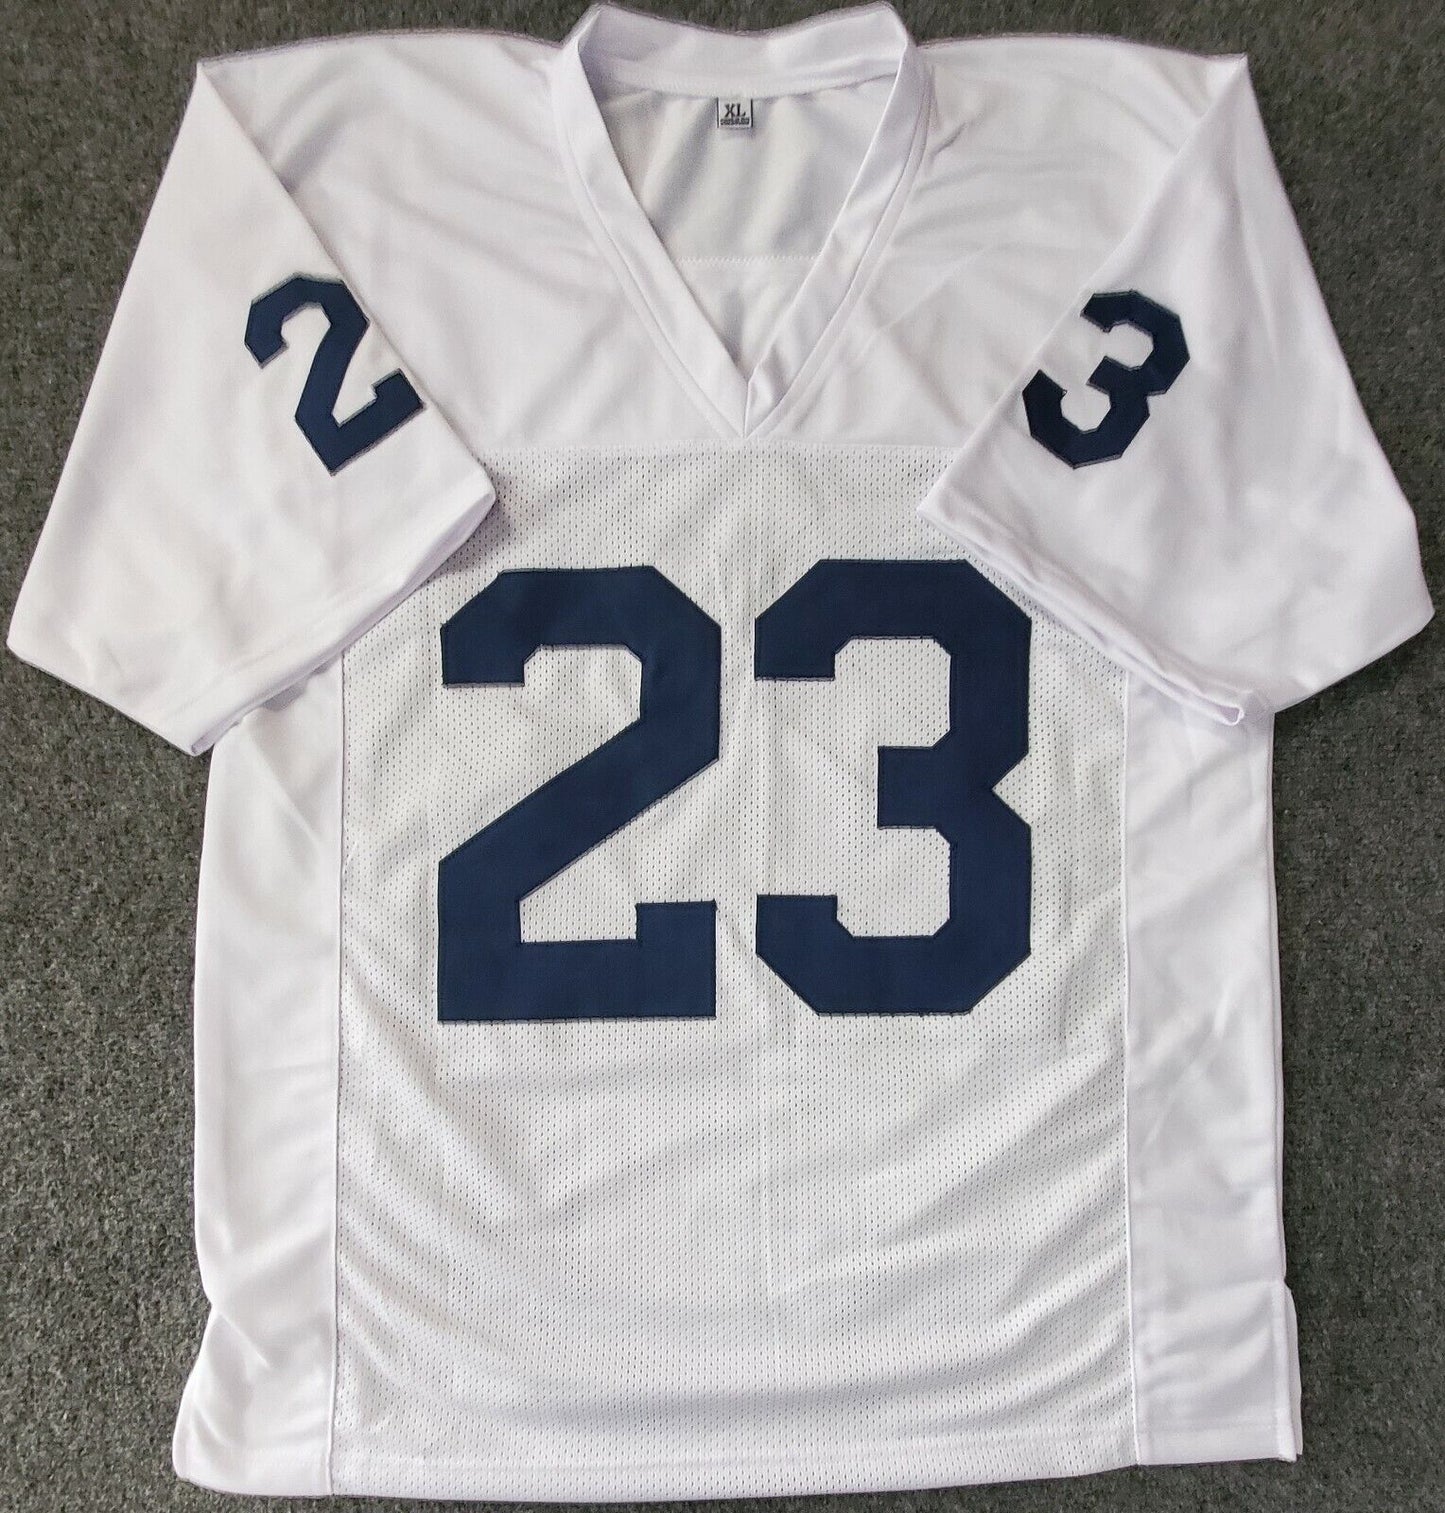 MVP Authentics Penn State Lydell Mitchell Autographed Signed Jersey Jsa Coa 90 sports jersey framing , jersey framing